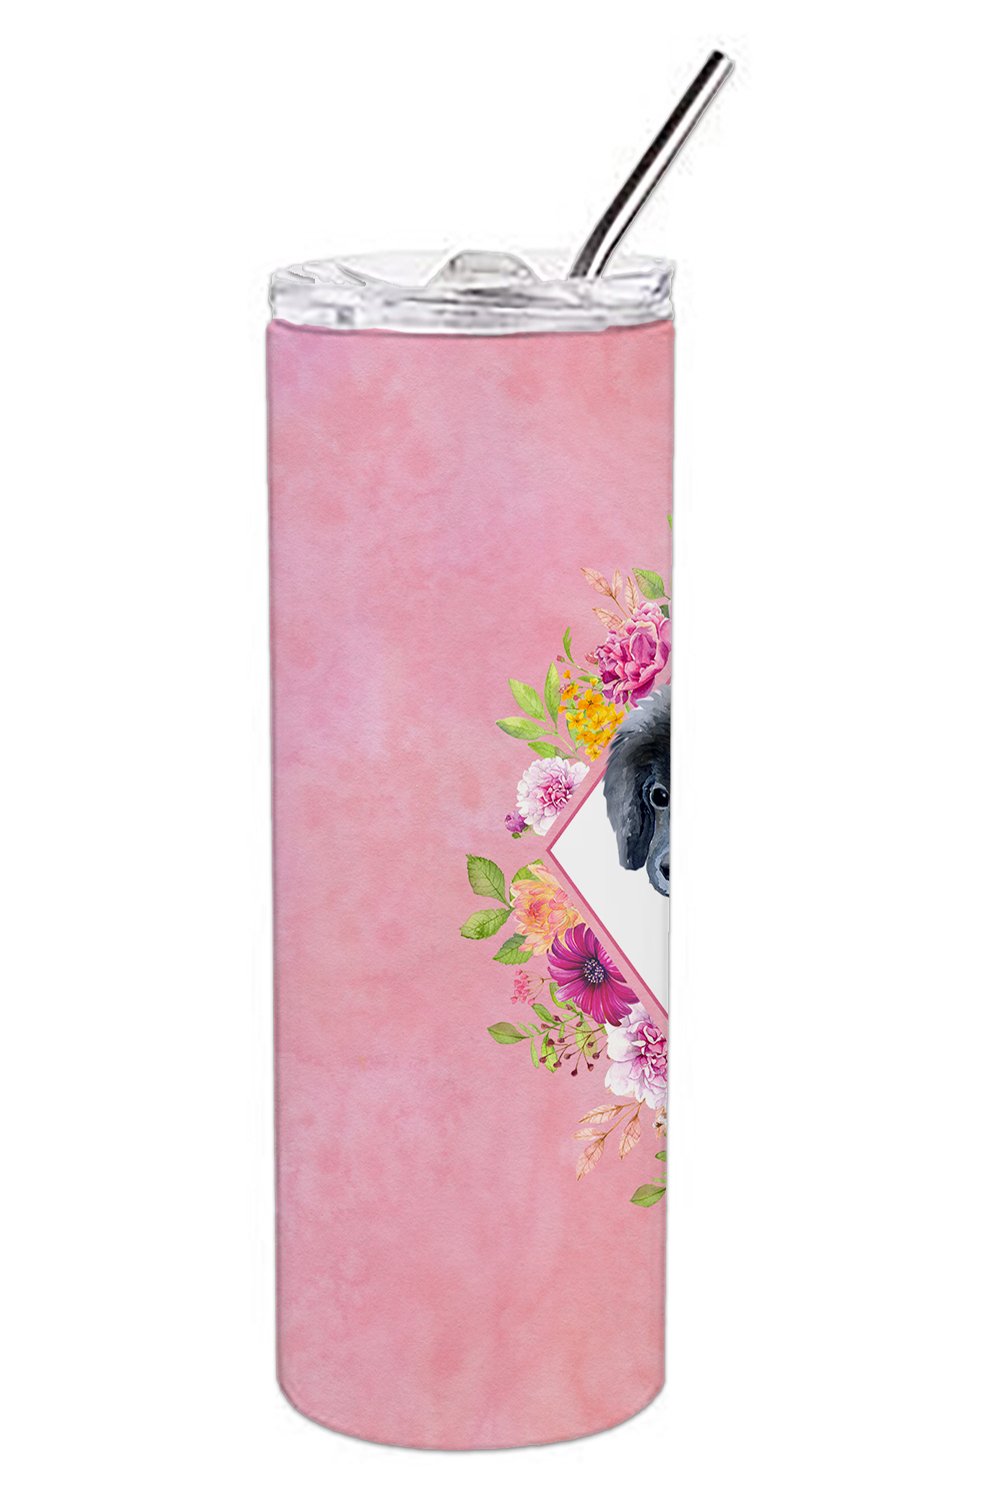 Newfoundland Puppy Pink Flowers Double Walled Stainless Steel 20 oz Skinny Tumbler CK4164TBL20 by Caroline's Treasures